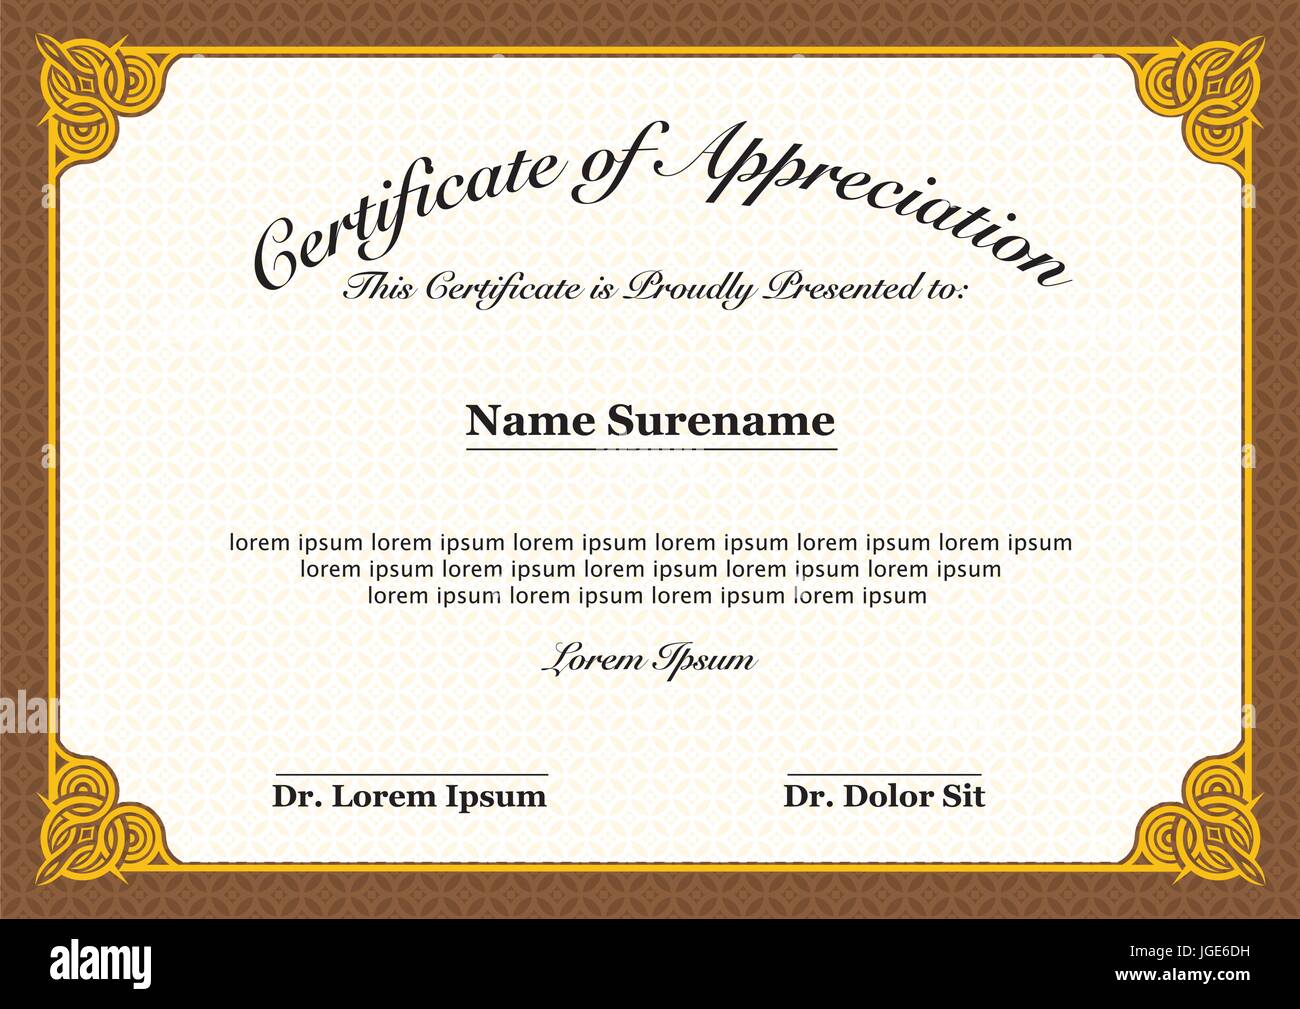 Certificate Of Appreciation Ready For Print Also Blank Space Provide